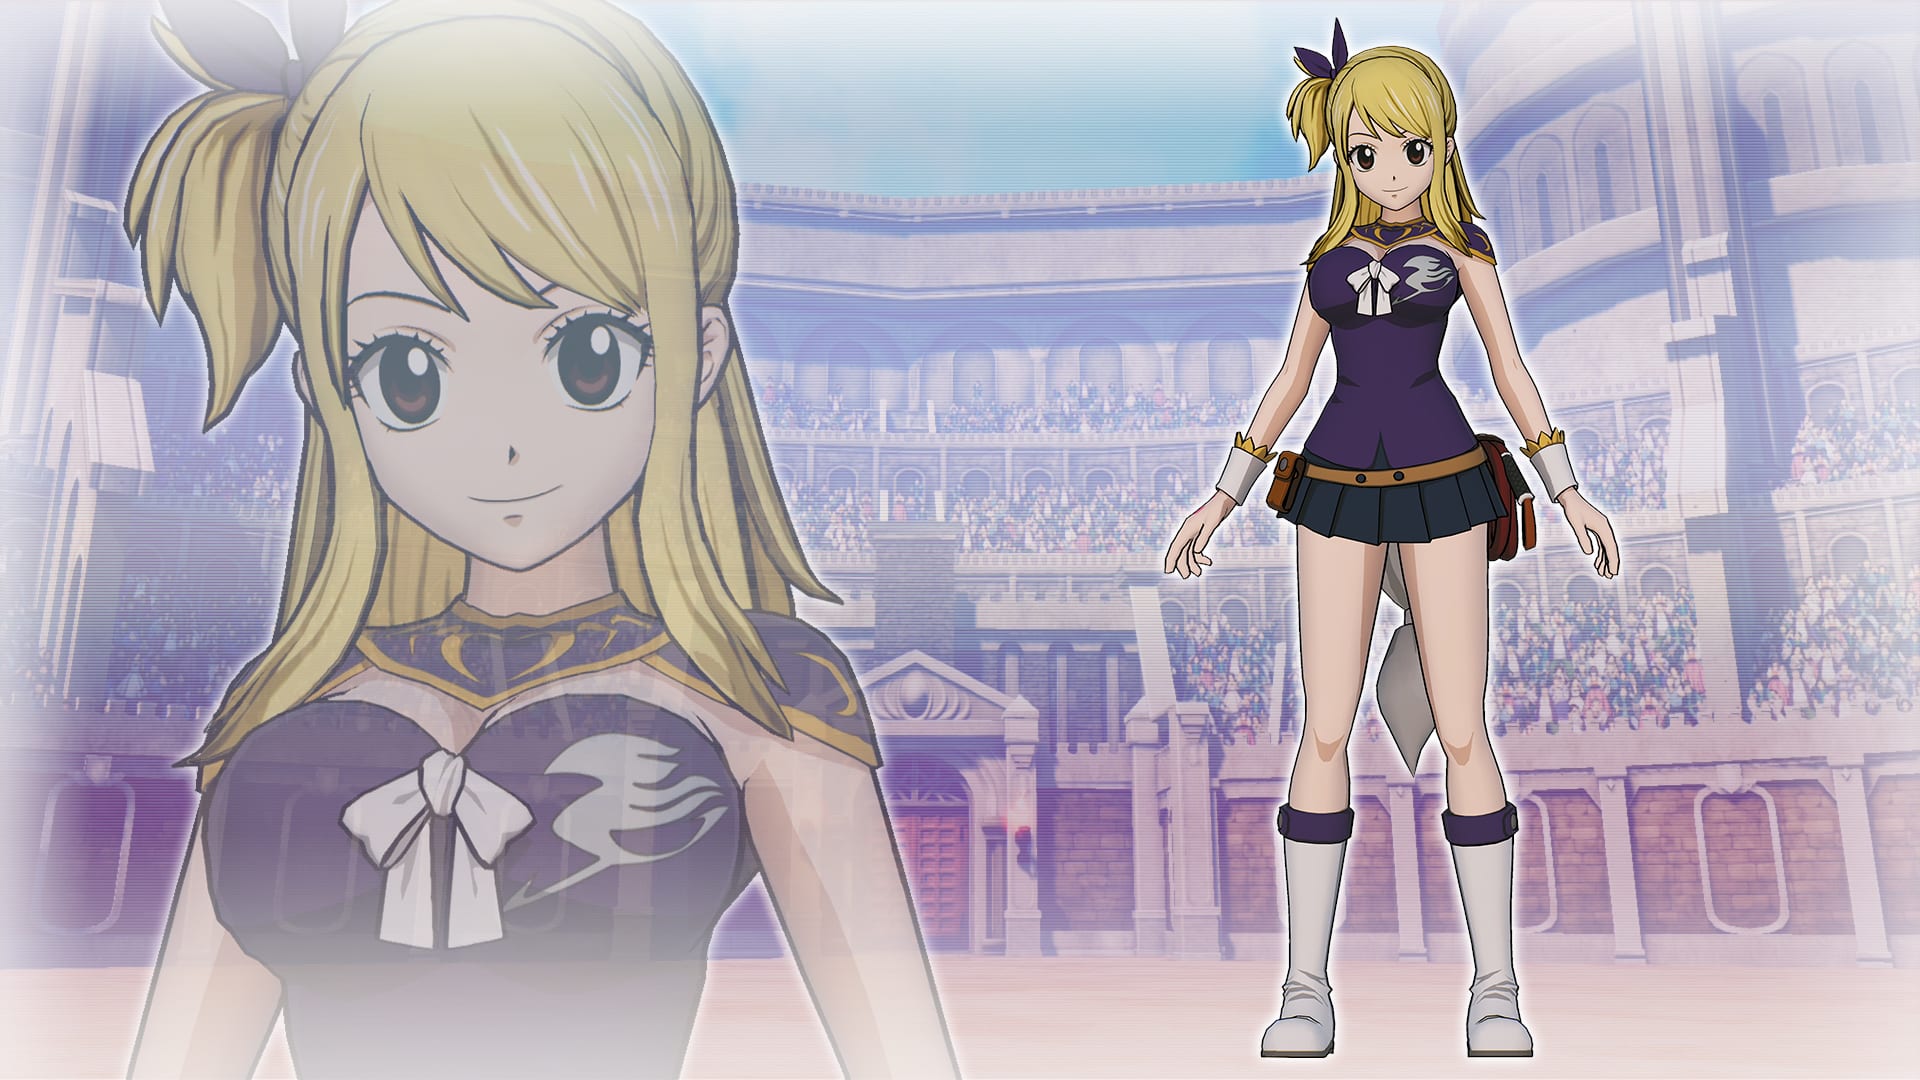 Lucy's Costume "Fairy Tail Team A" 1